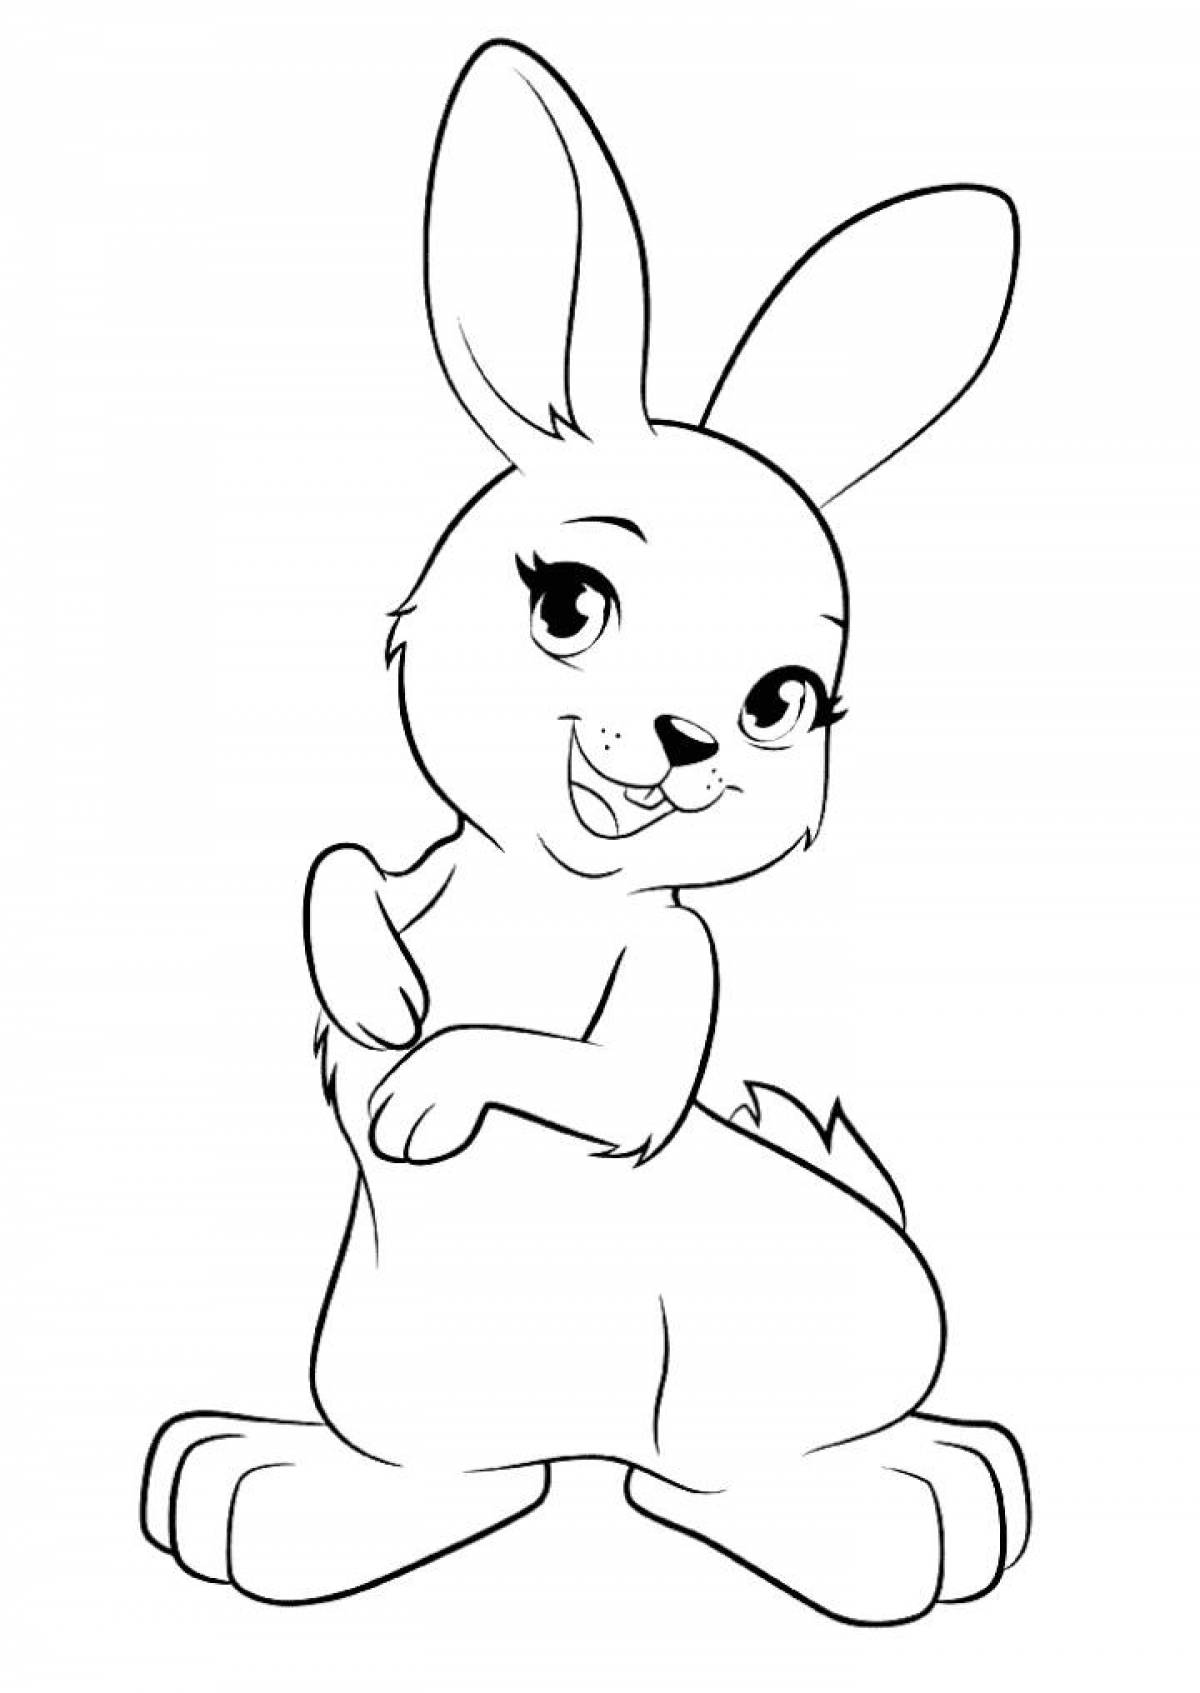 Drawing hare